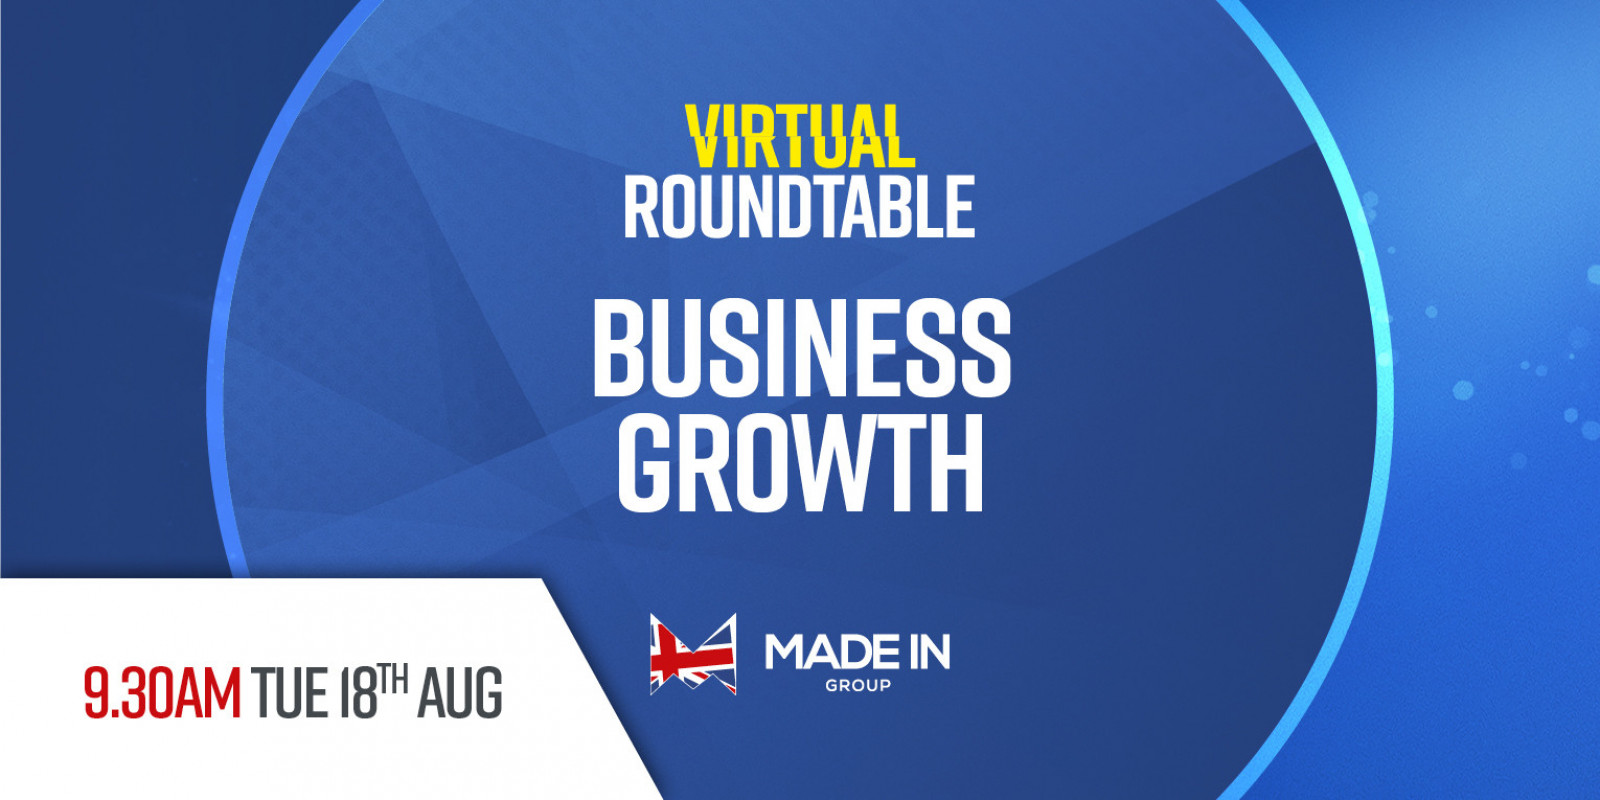 What Is a "Virtual Roundtable"?